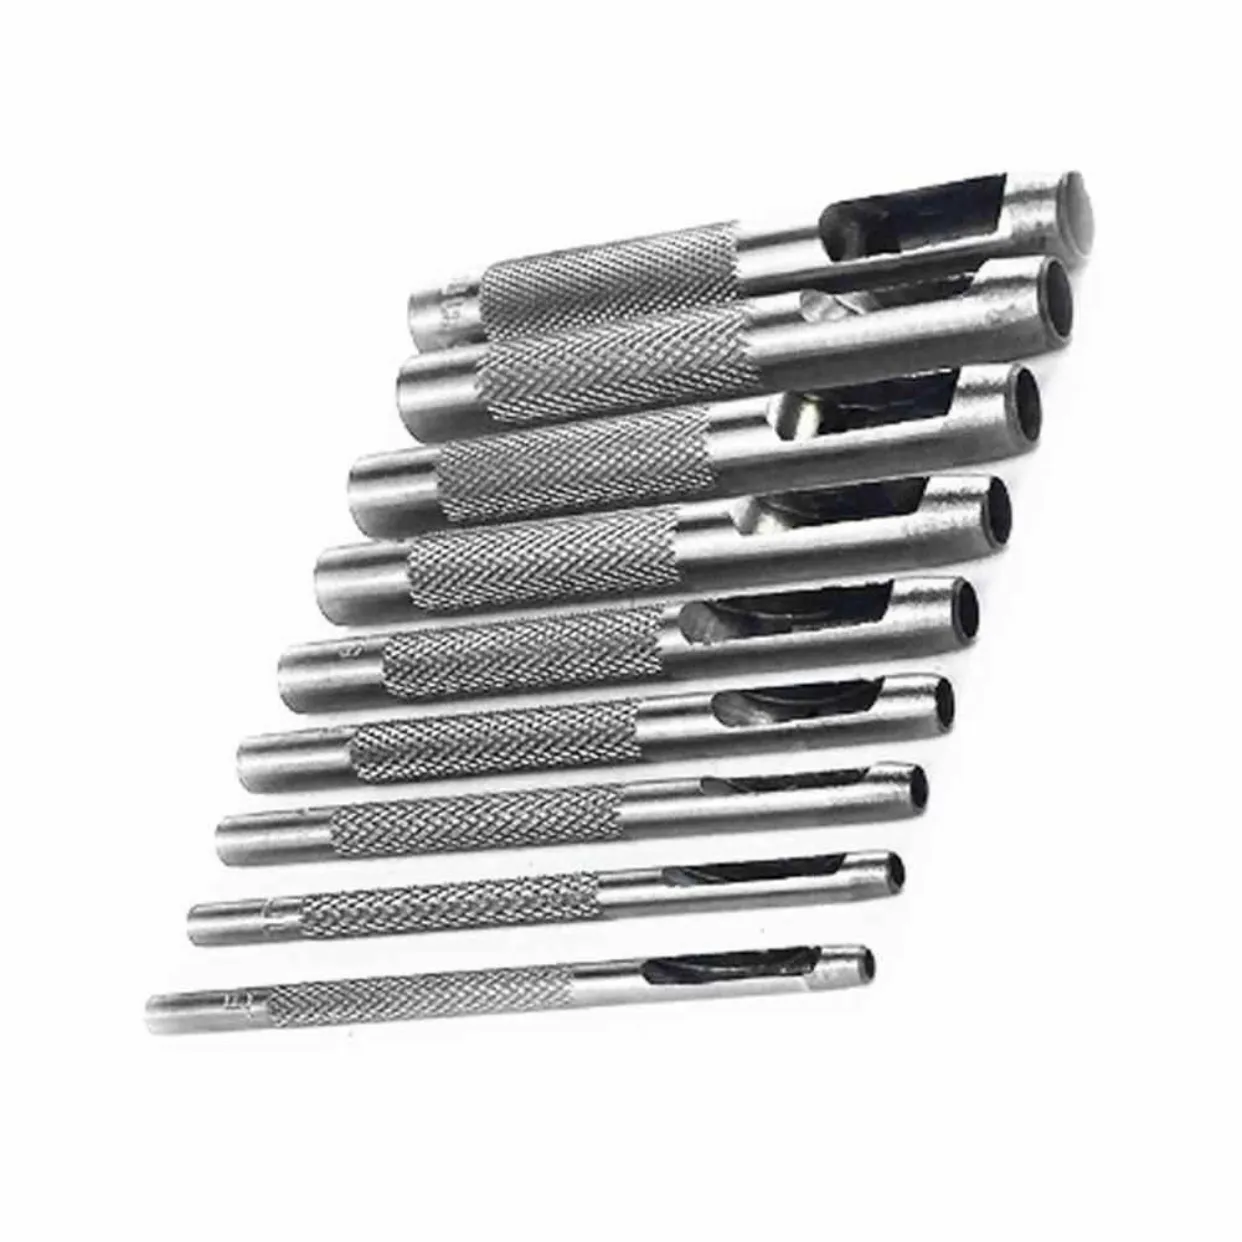 TEKTON Hollow Punch Set (12-Piece)  6588 - Hand Tool Hole Punches 